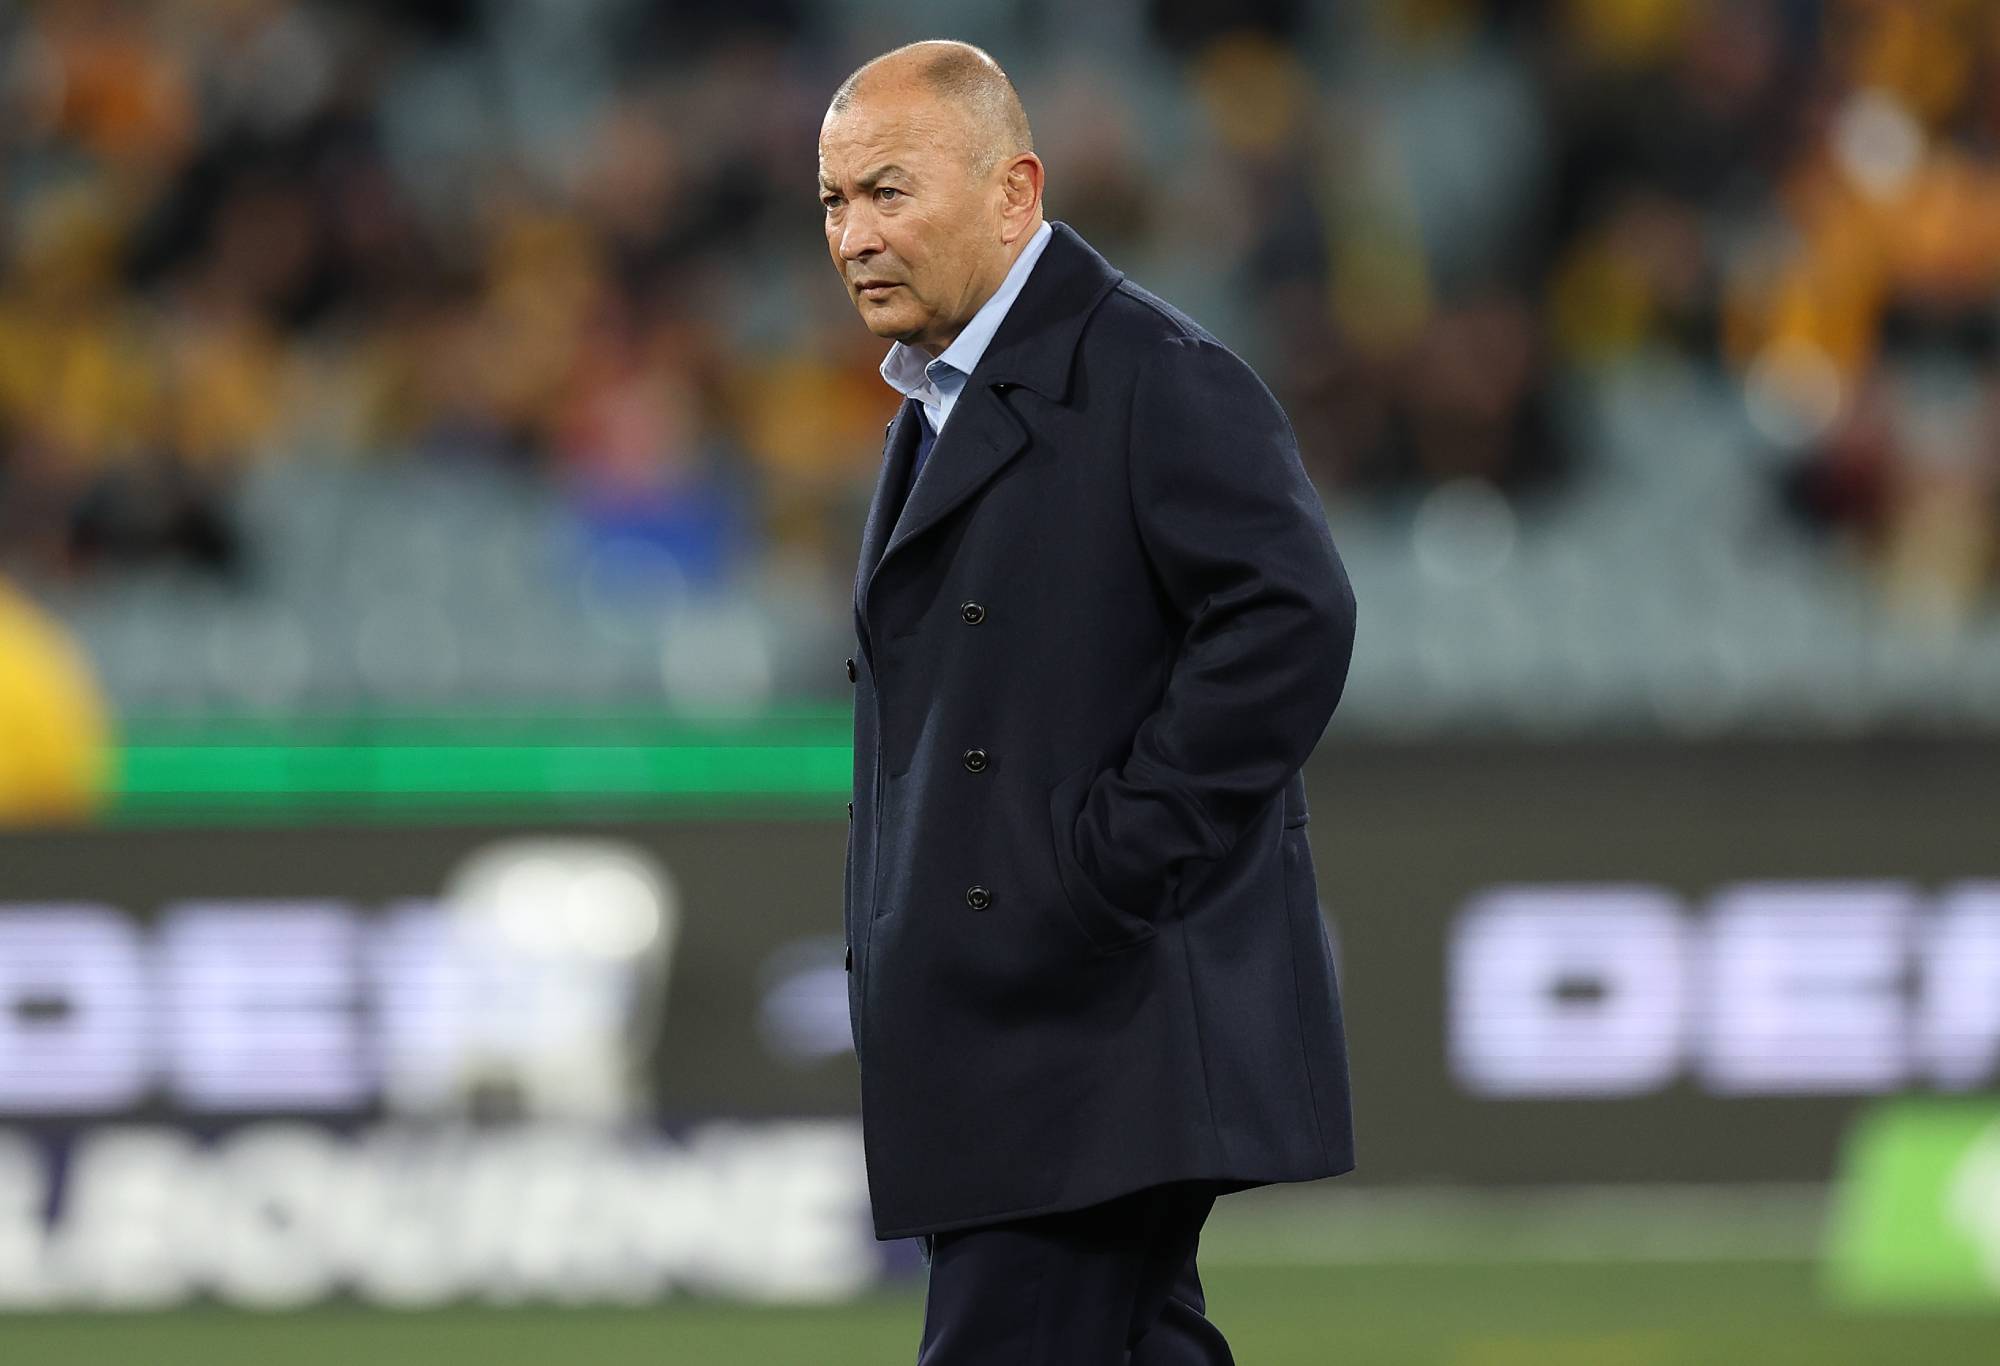 Eddie Jones, Head Coach of the Wallabies before the The Rugby Championship & Bledisloe Cup match between the Australia Wallabies and the New Zealand All Blacks at Melbourne Cricket Ground on July 29, 2023 in Melbourne, Australia. (Photo by Cameron Spencer/Getty Images)